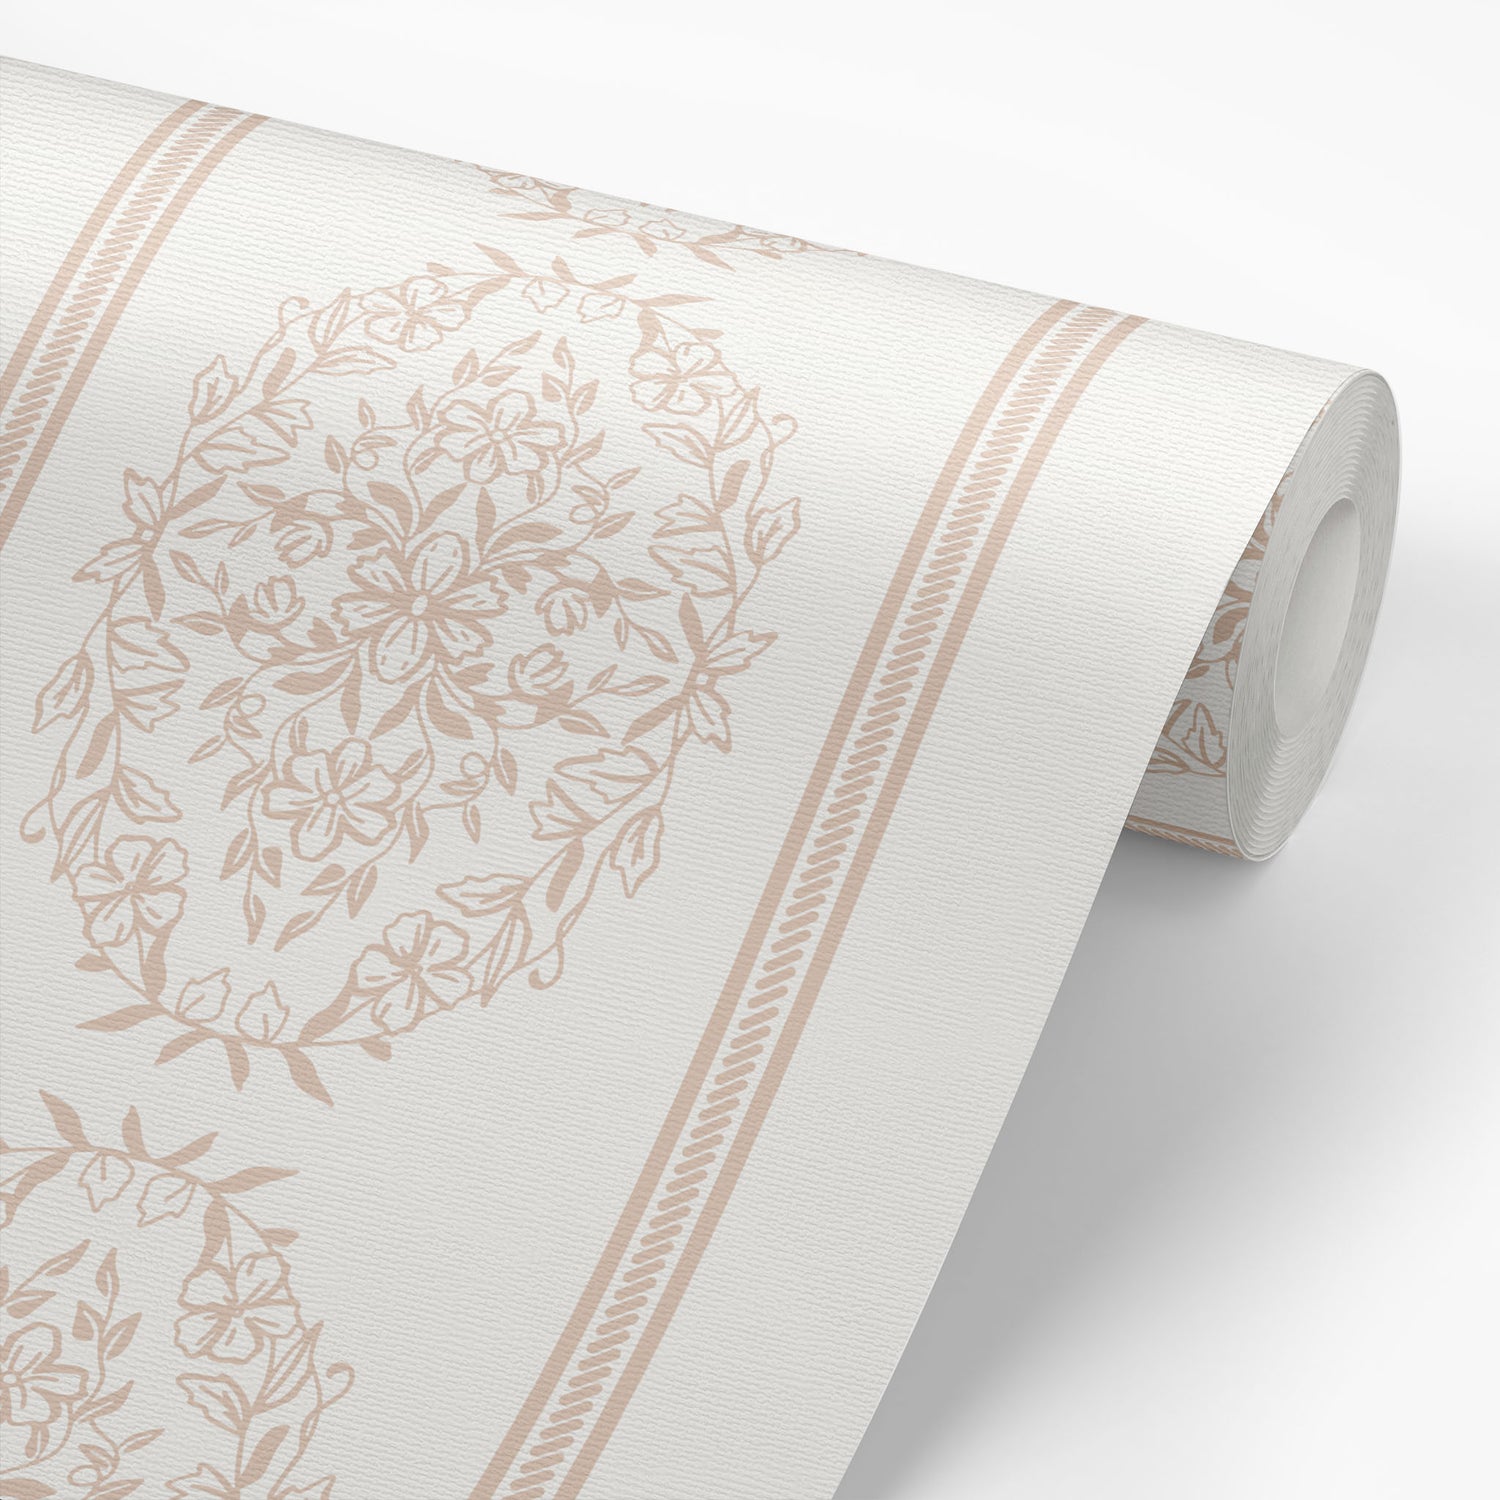 Made with top-quality materials, this wallpaper is the perfect choice for adding a touch of elegance to your space shown on wallpaper roll.